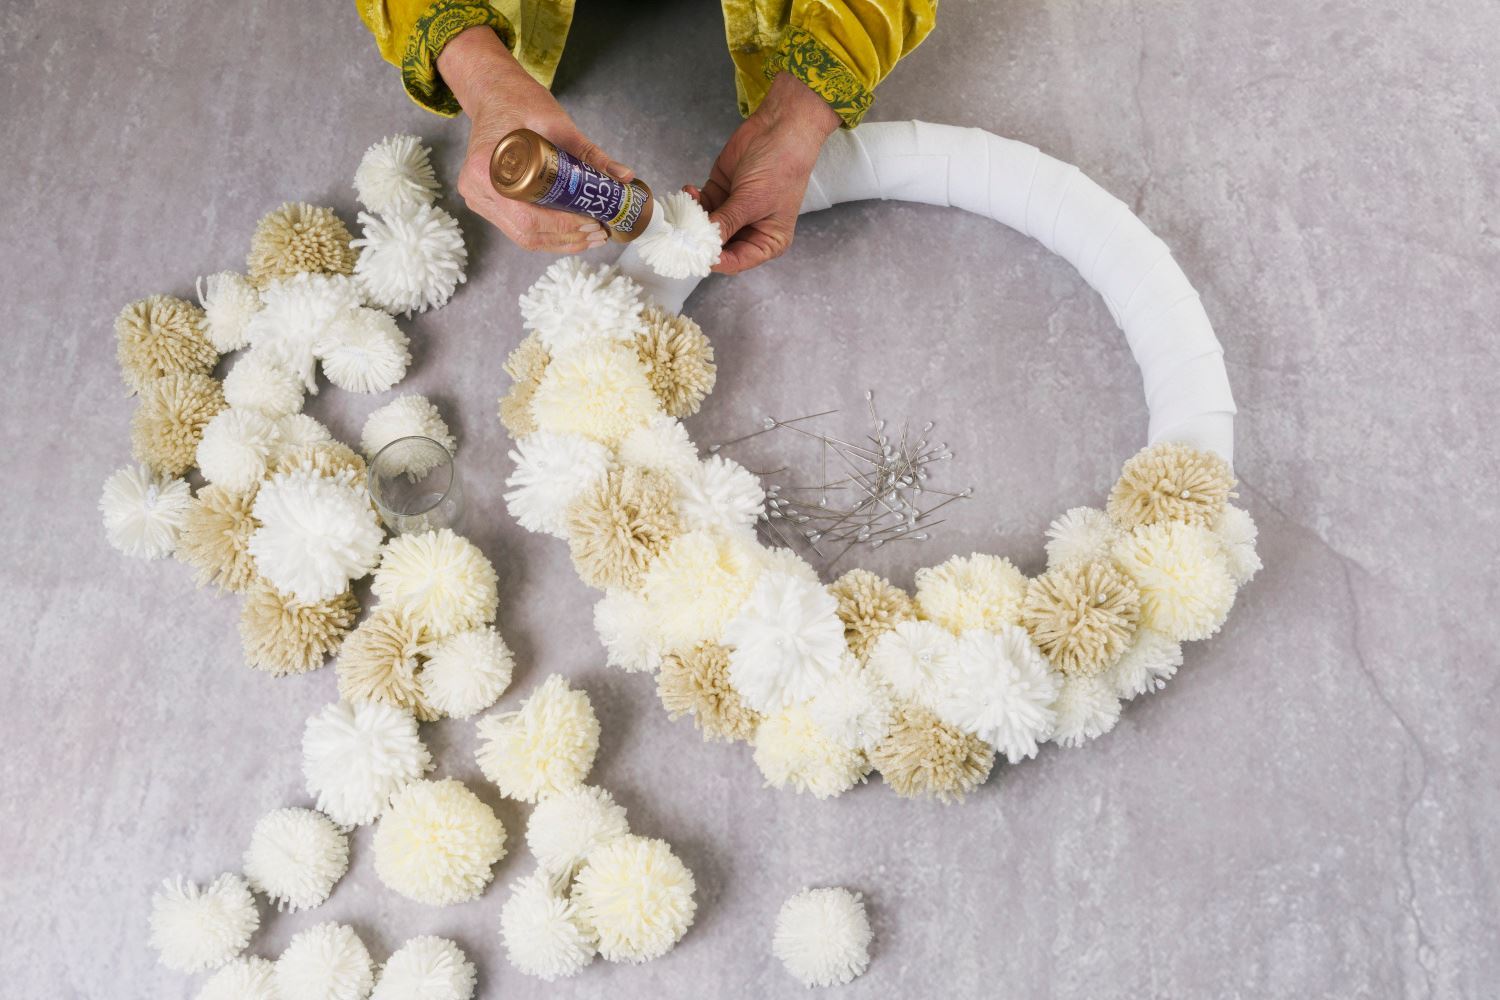 Use Tacky Glue to adhere the pom poms to the wreath